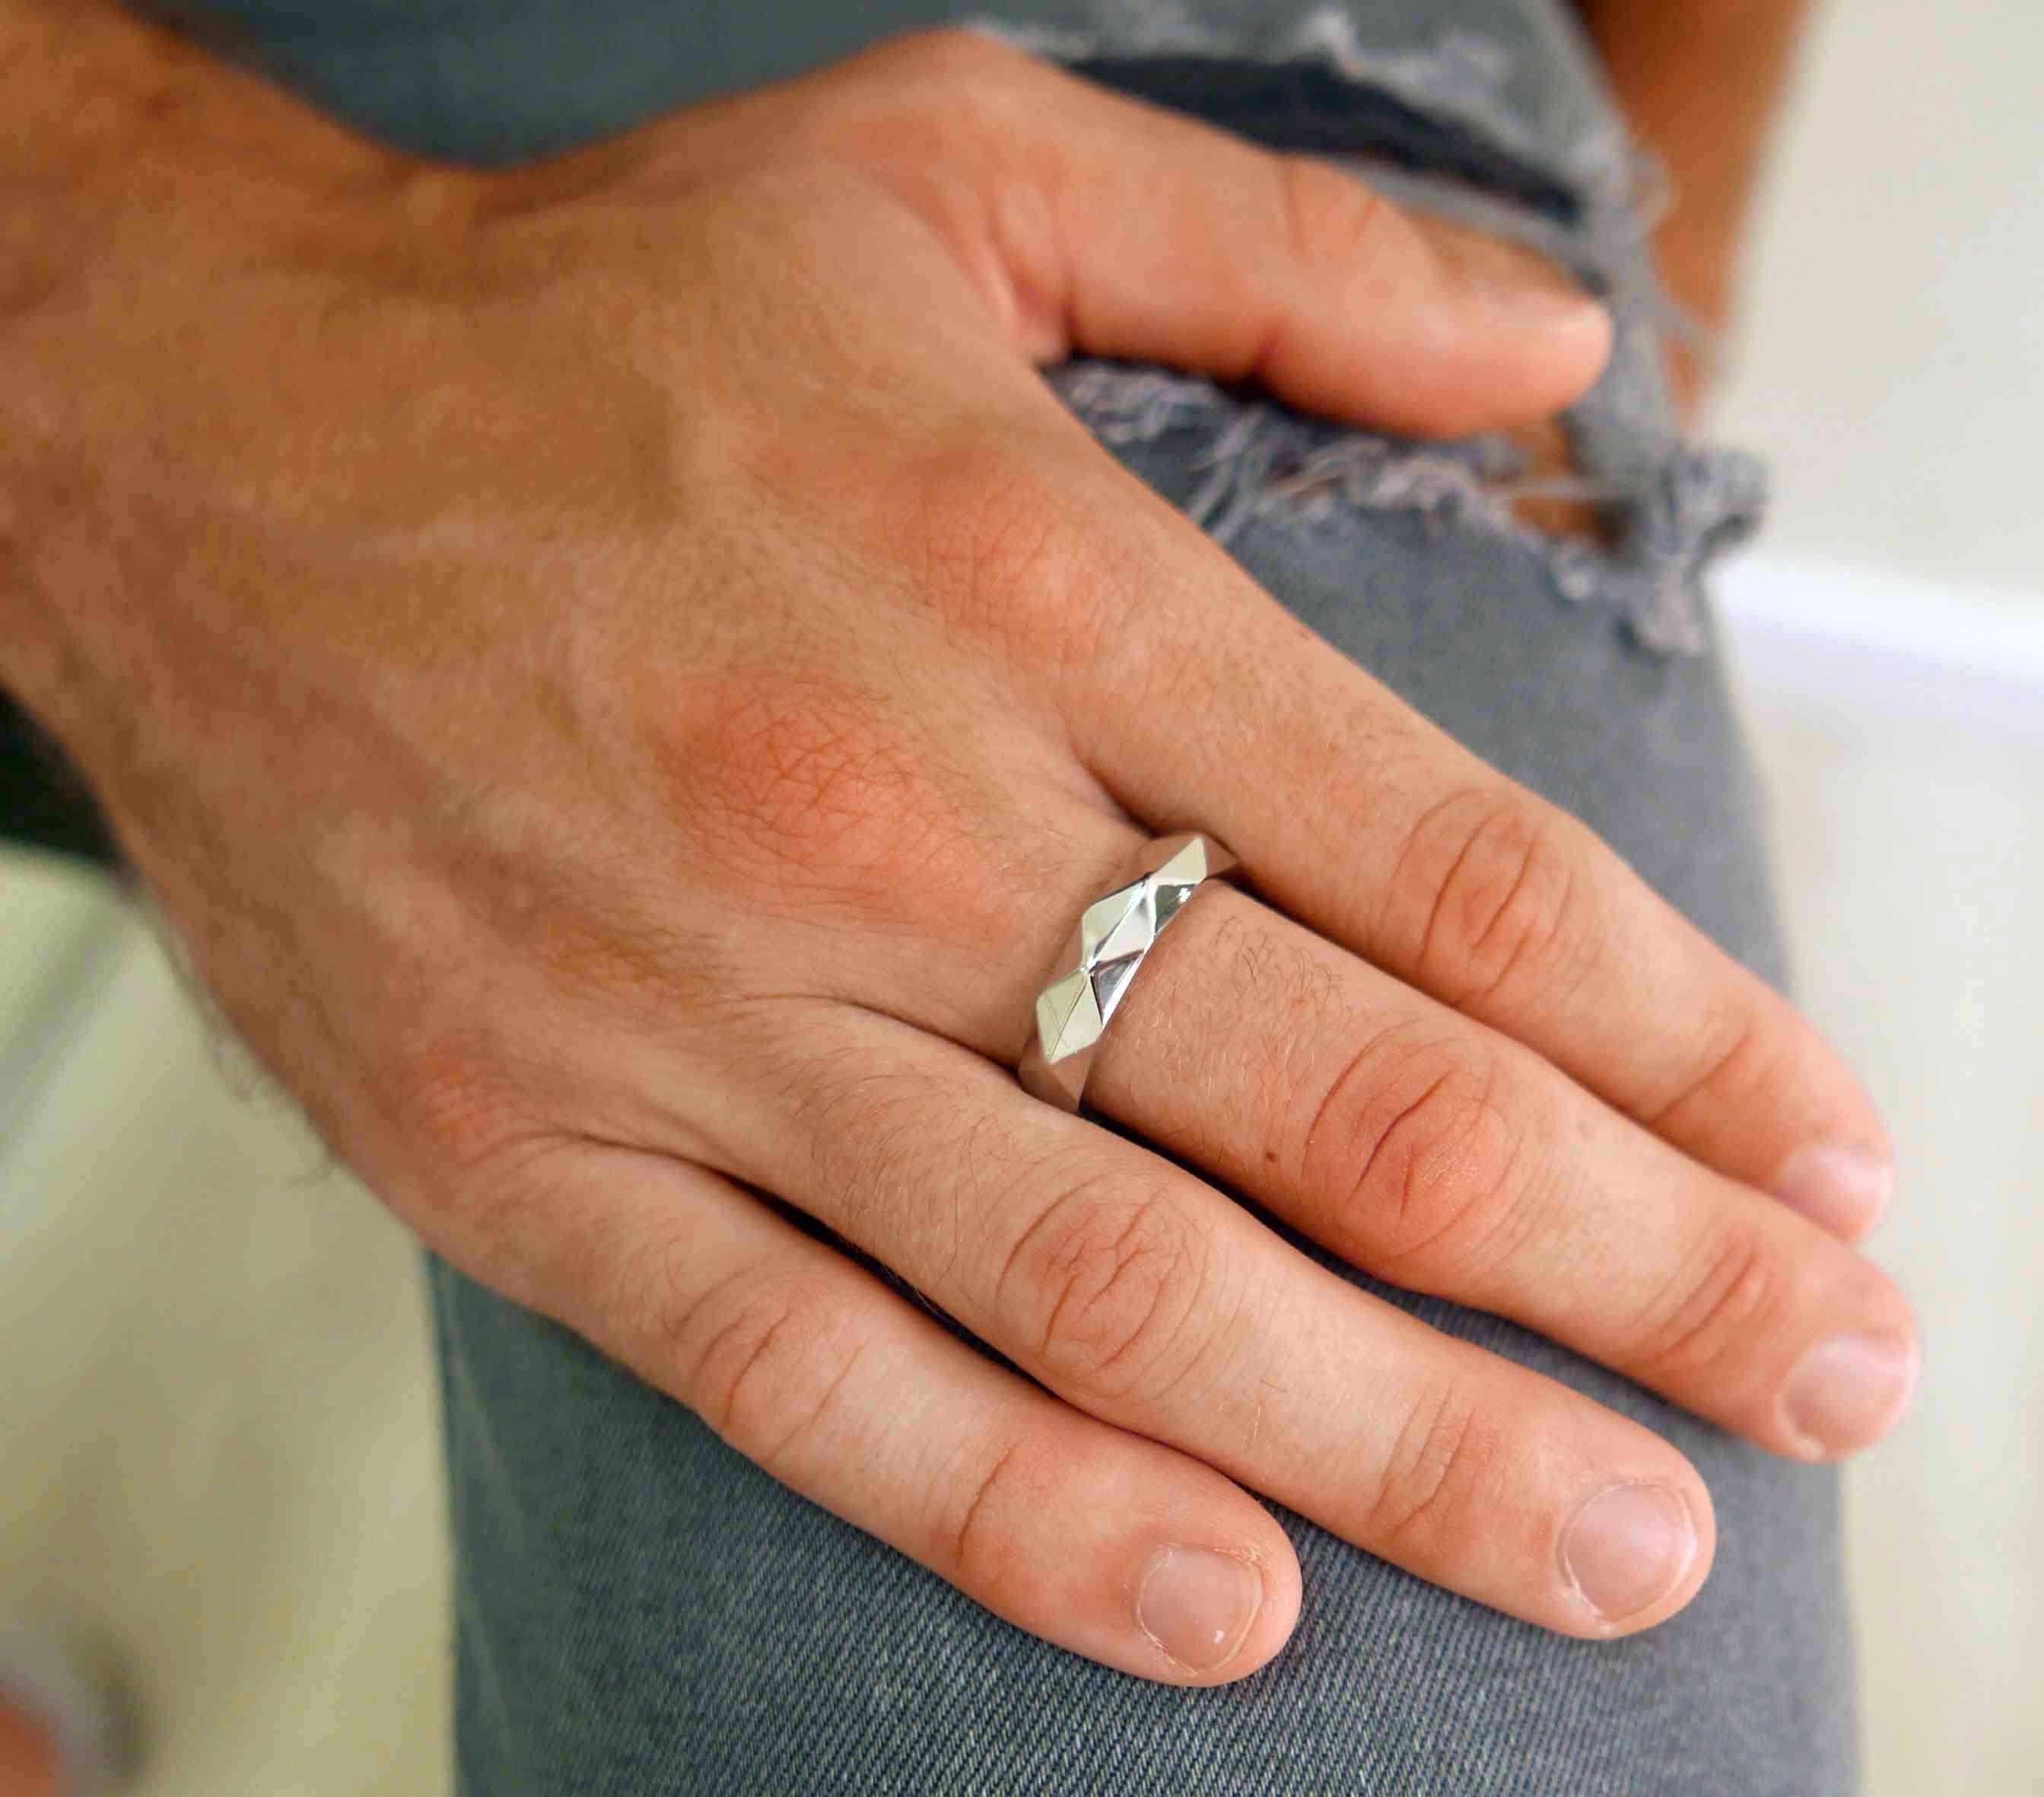 Woman Who Lost Weight Says Her Husband Wants Her To Wear Her Wedding Ring  So Everyone Knows She's Taken | YourTango